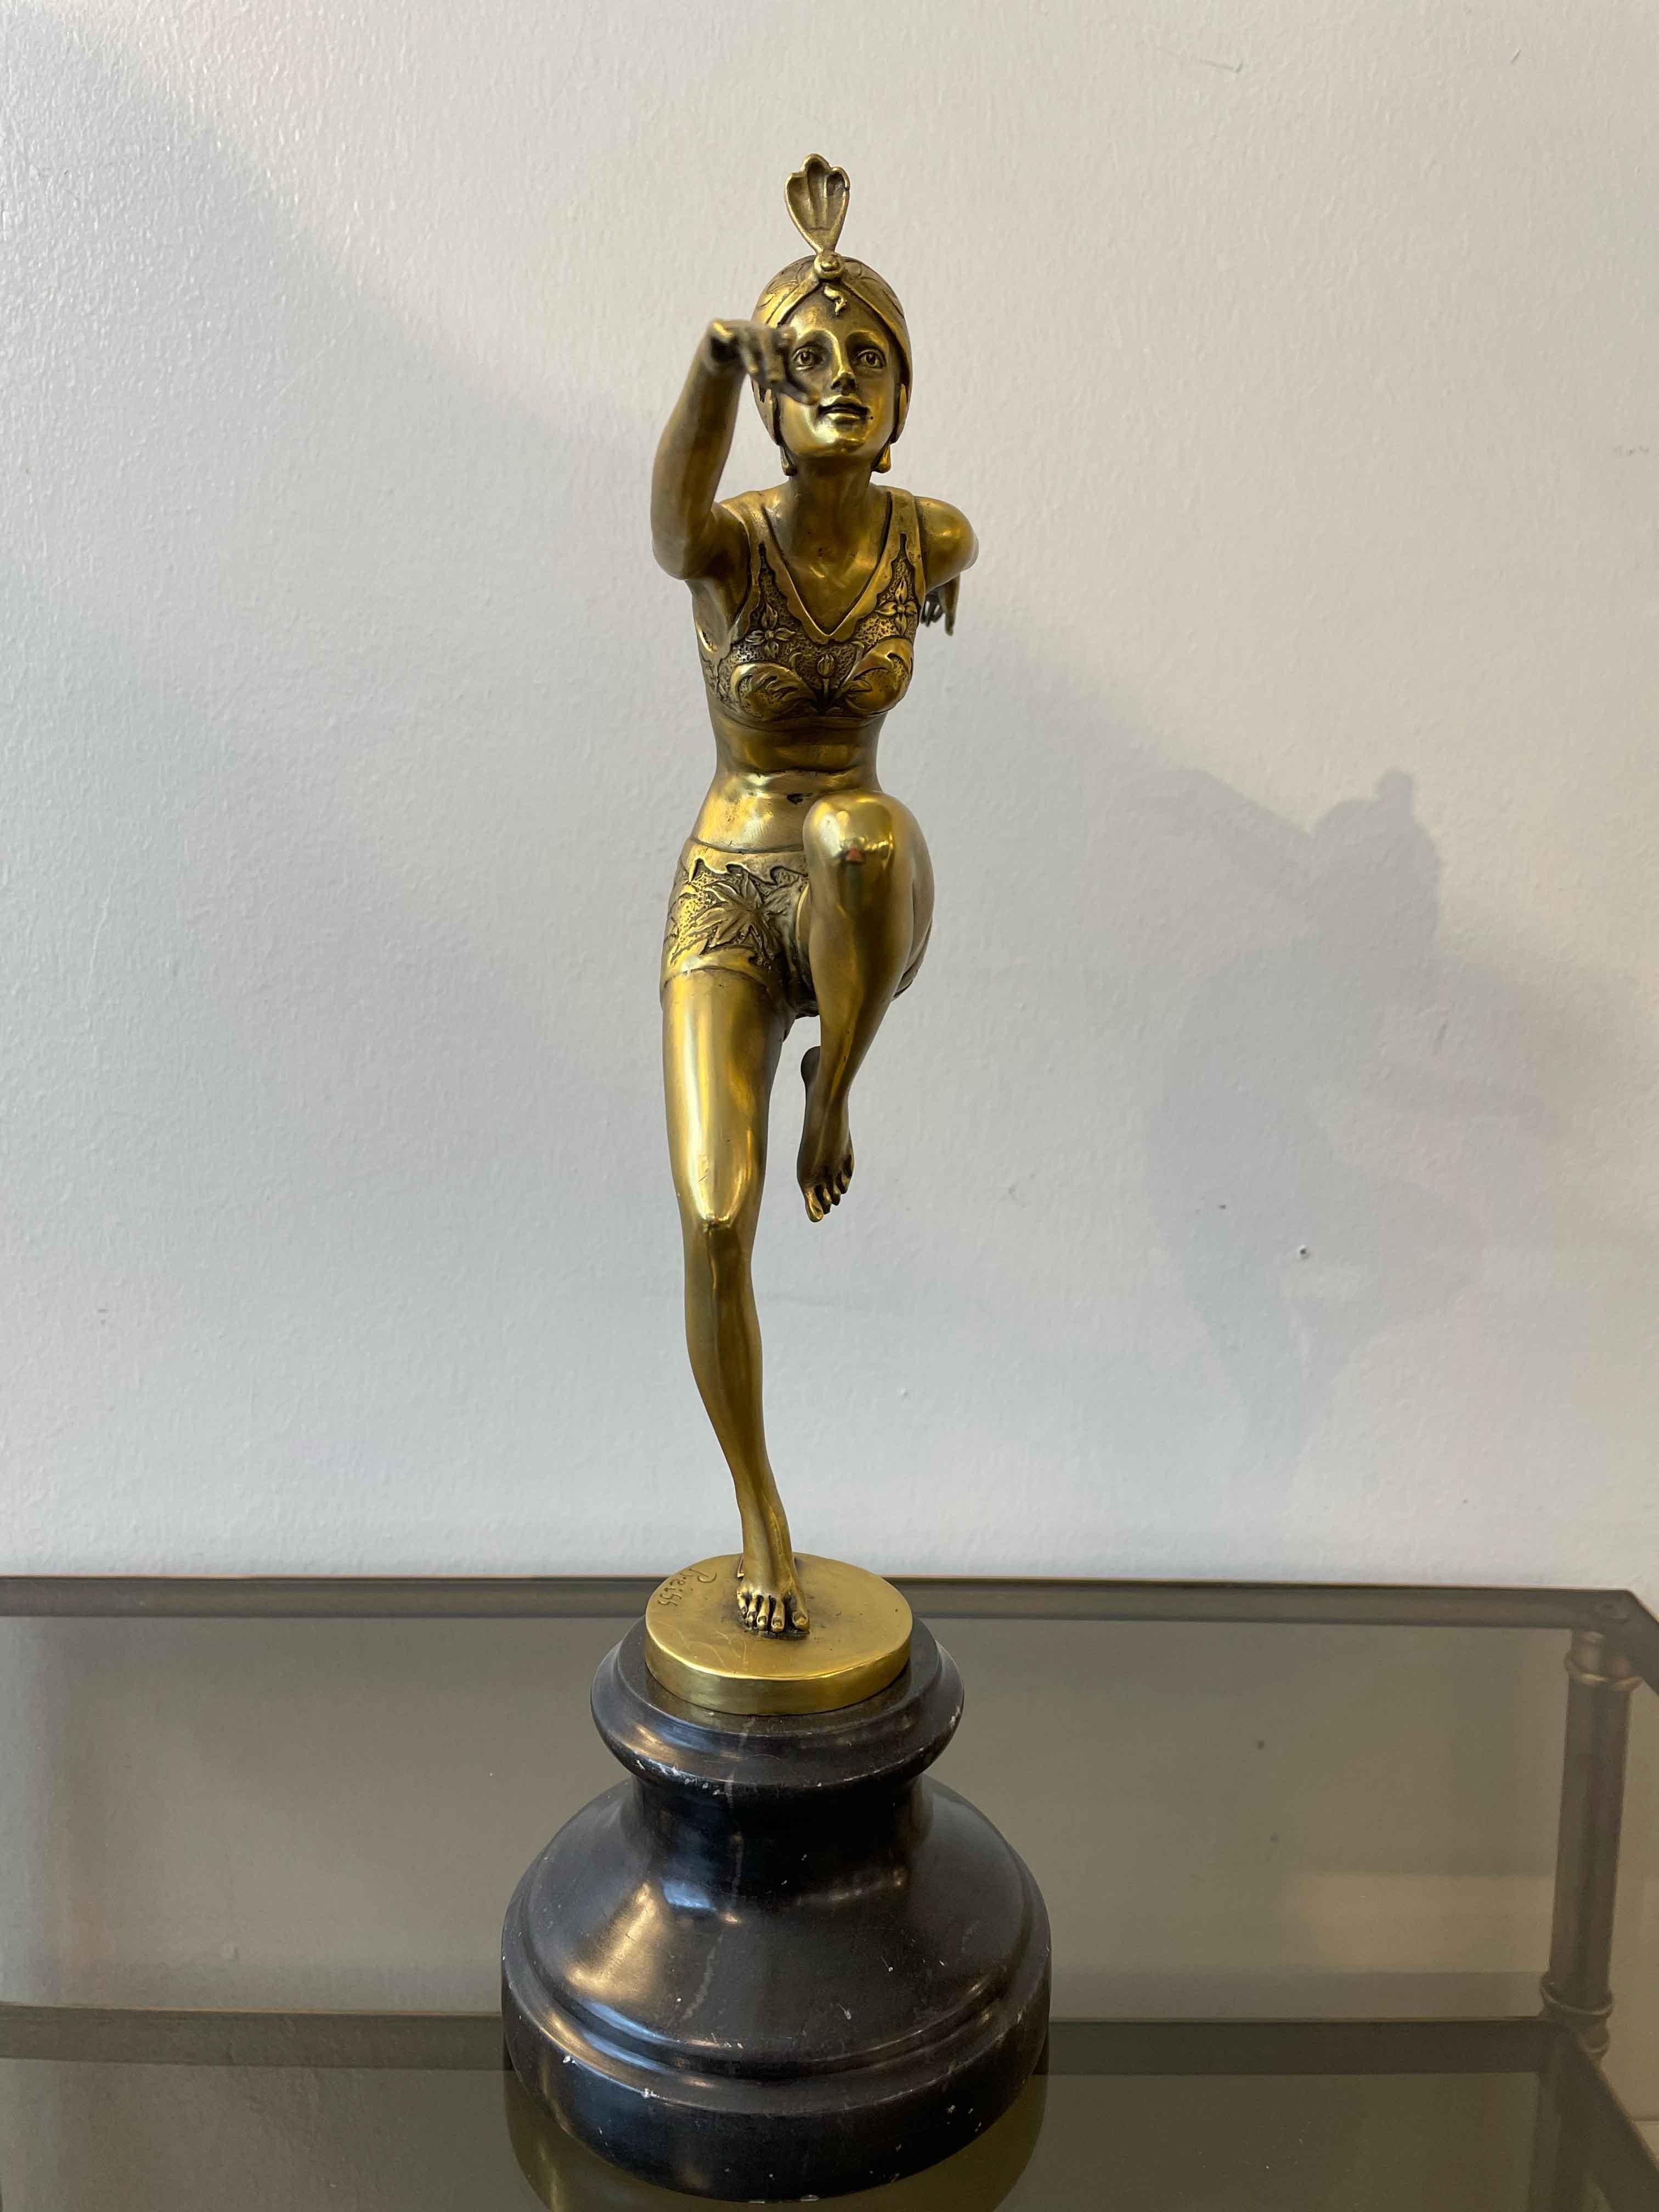 Art Deco sculpture of a Ballerina in gilded bronze by Preiss.

The sculpture features many details all over the figure.

Measurements: H 38 cm - base diam. 12 cm